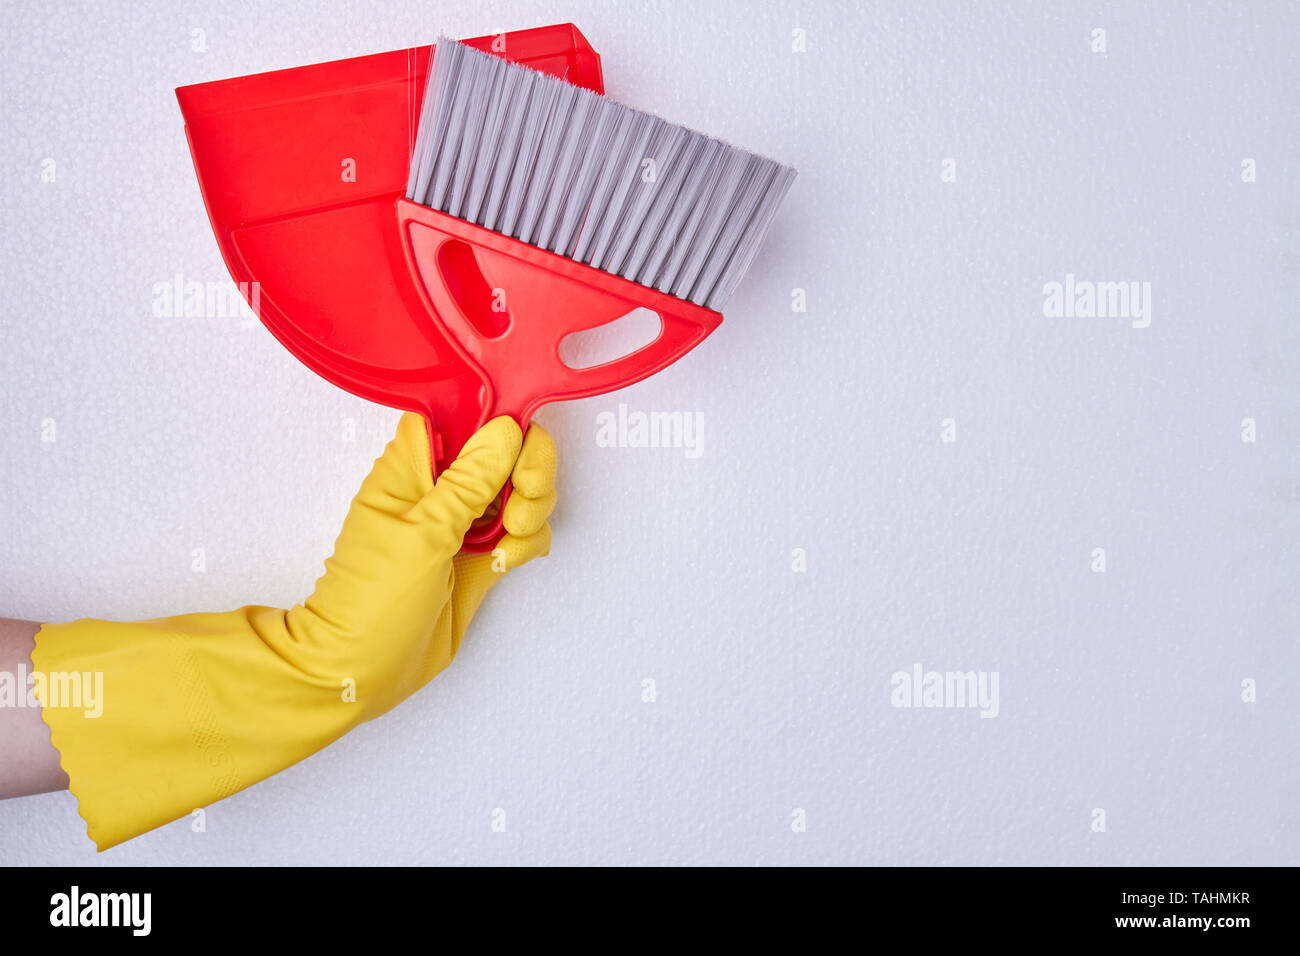 Hand in gloves holding dustpan and brush. Concept of cleaning service. Stock Photo